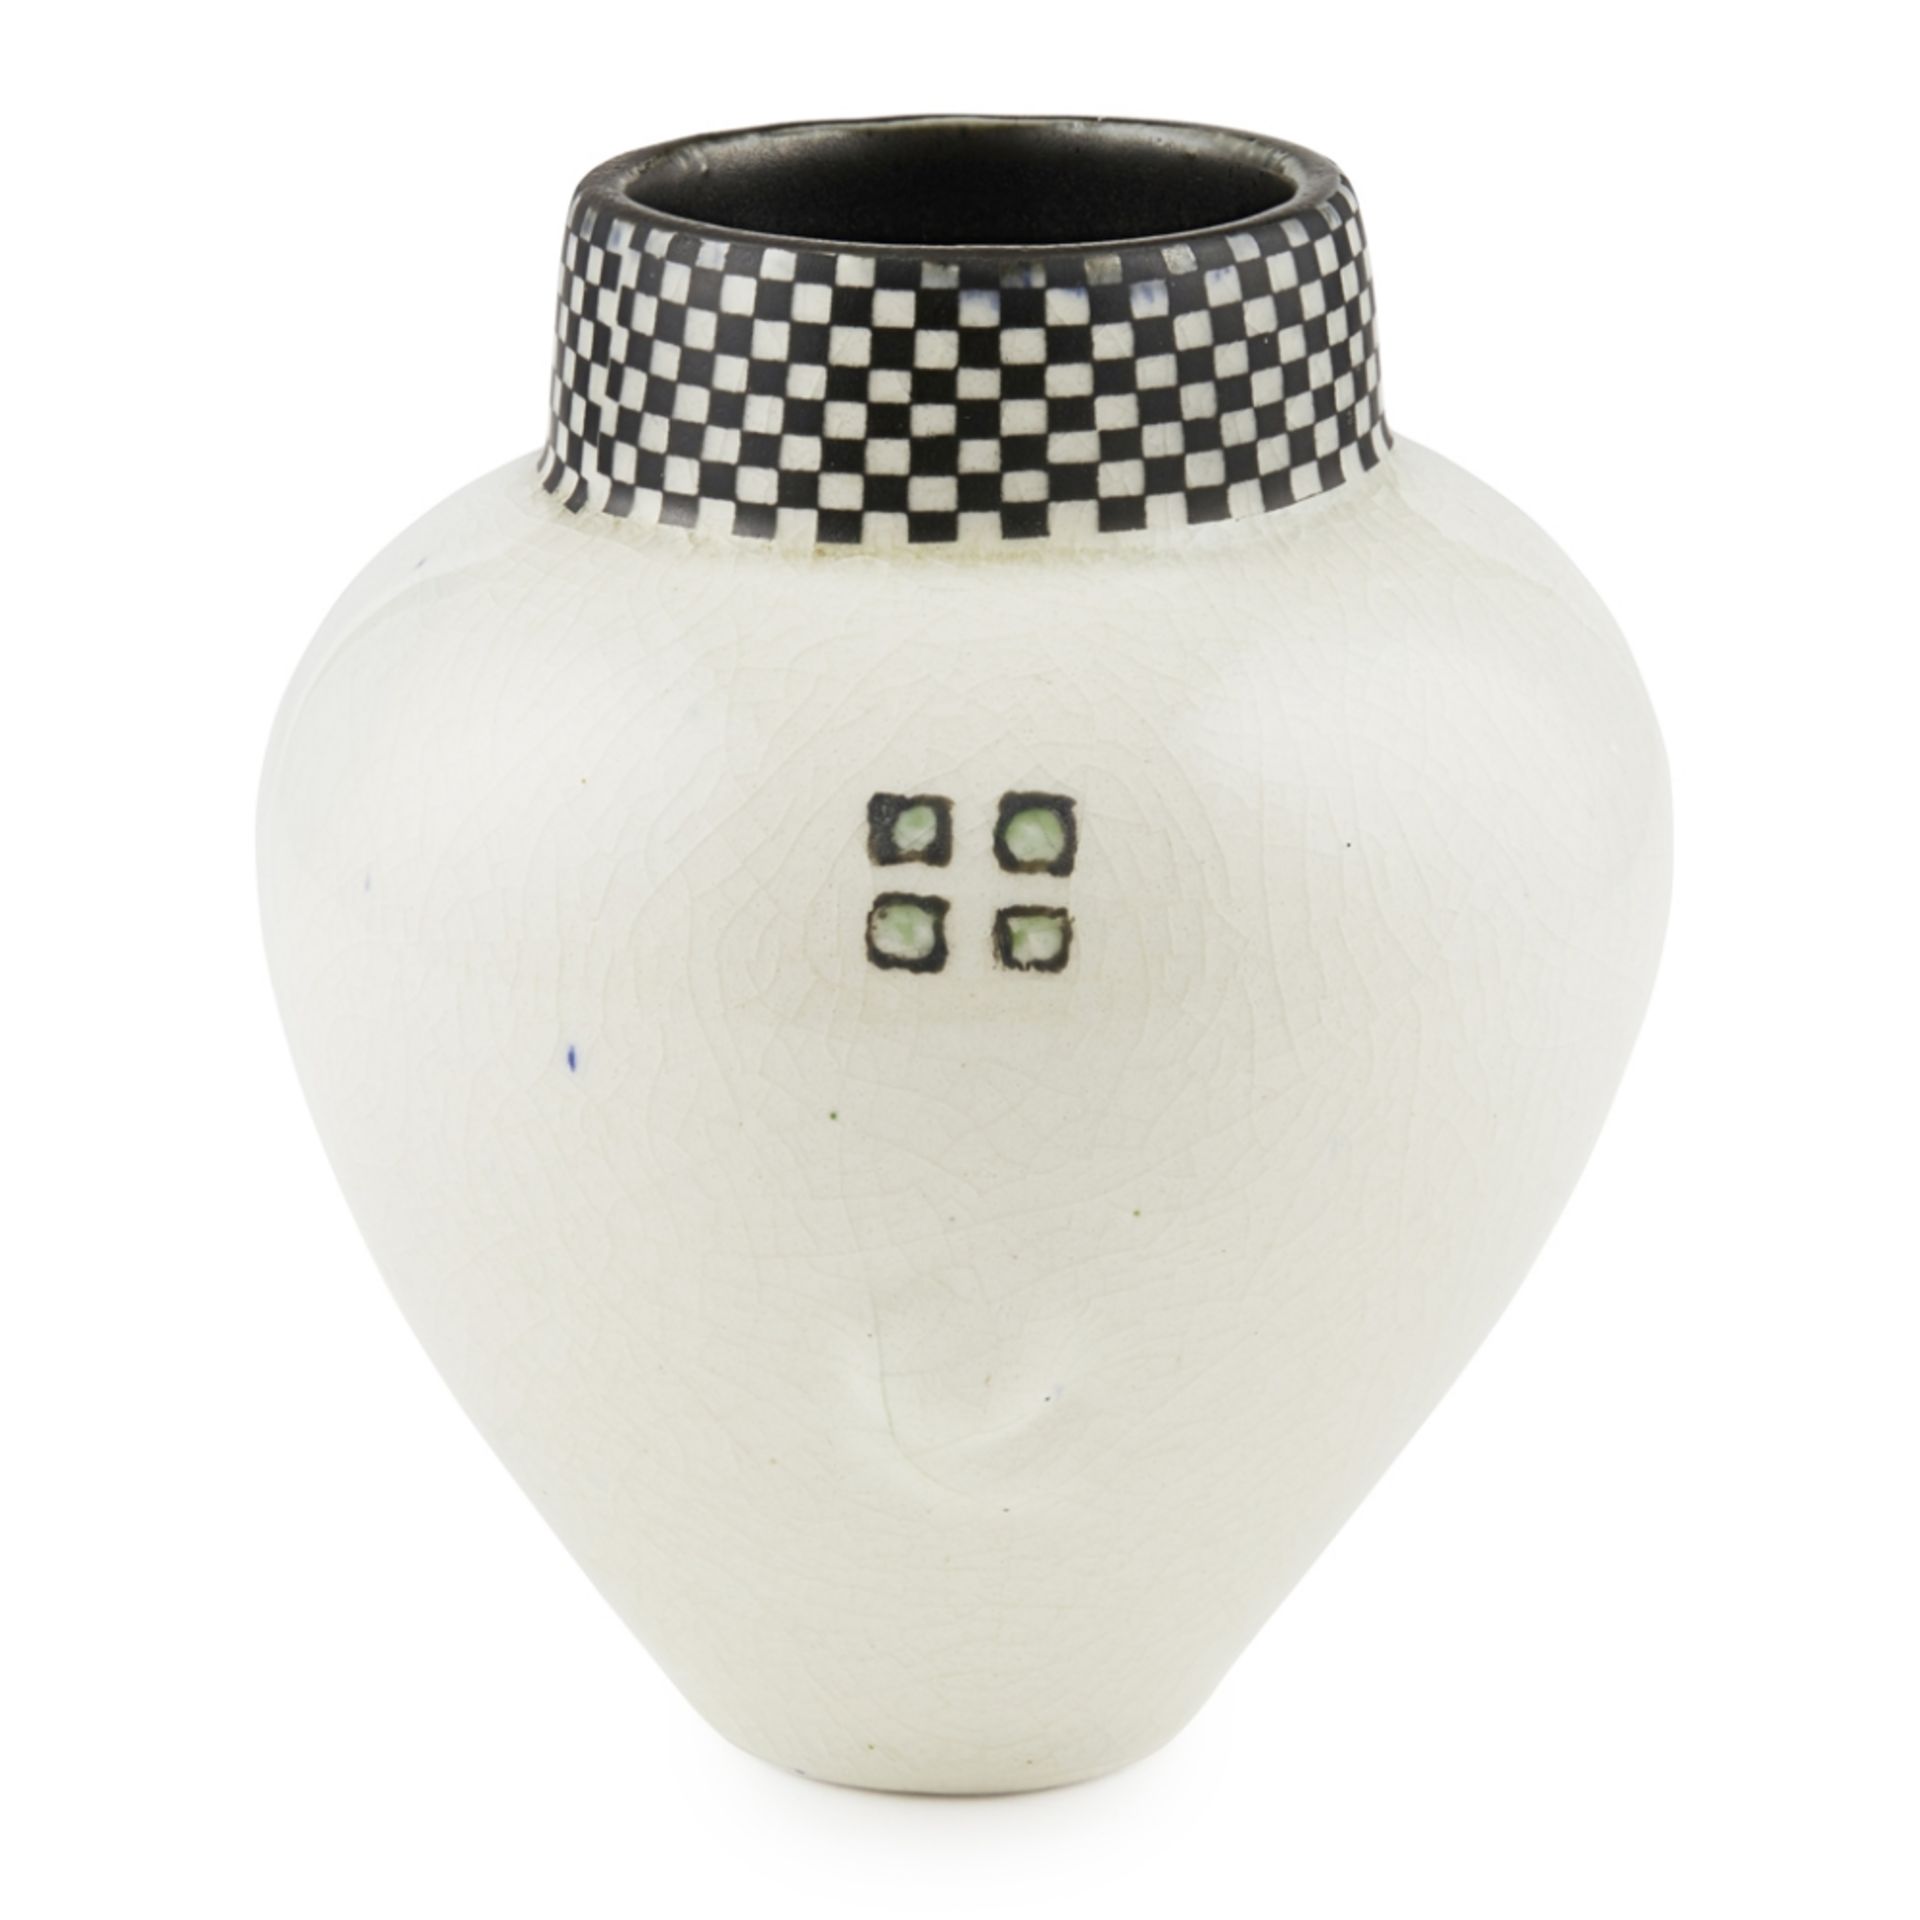 MARGARET GILMOUR (1860-1942) RARE EARTHENWARE VASE, CIRCA 1910 of ovoid form, with chequer